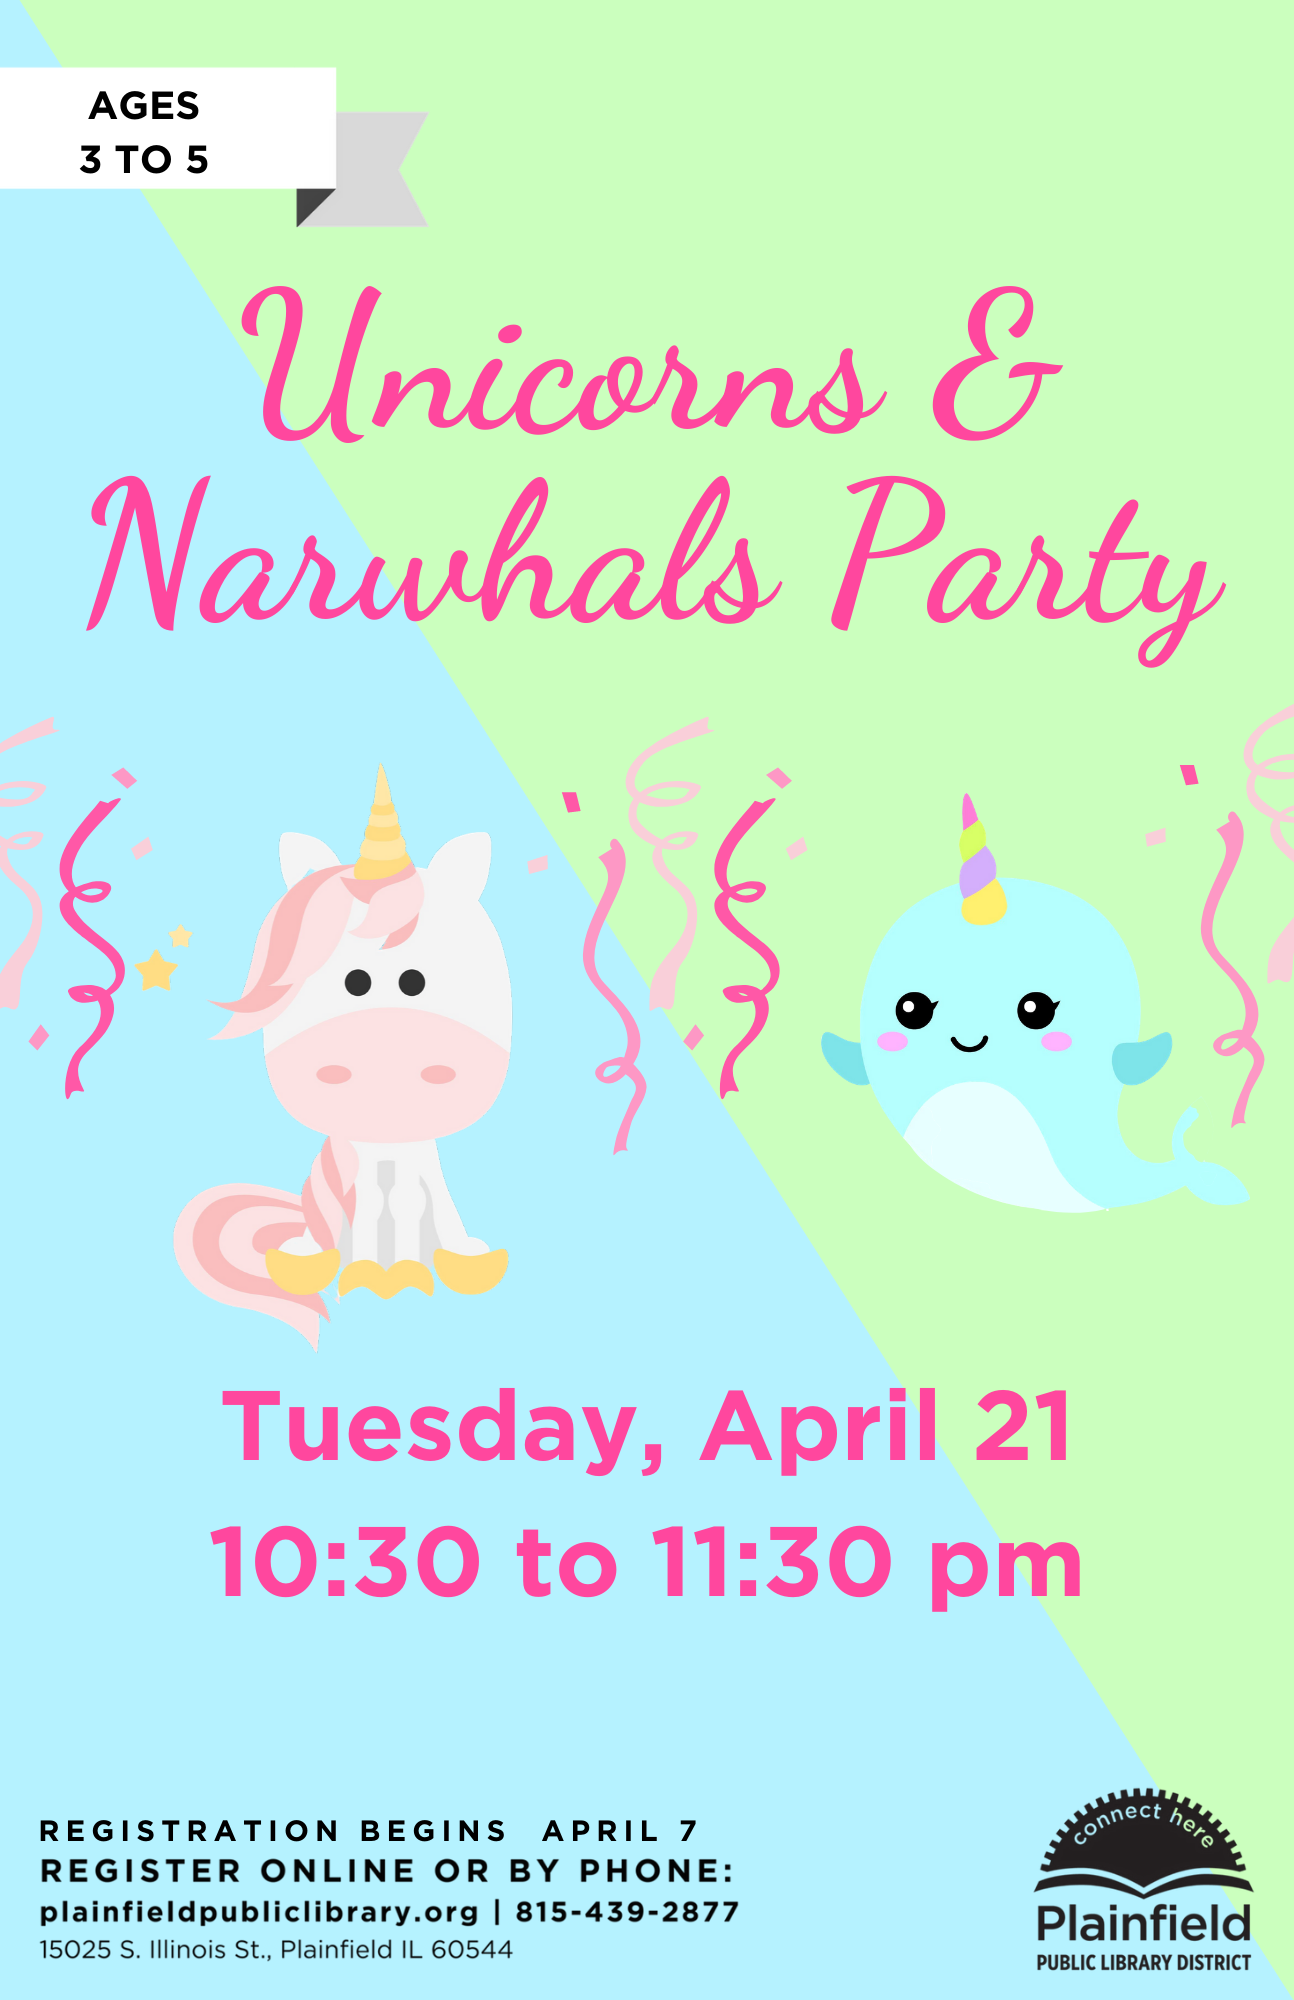 Unicorns and Narwhals Party